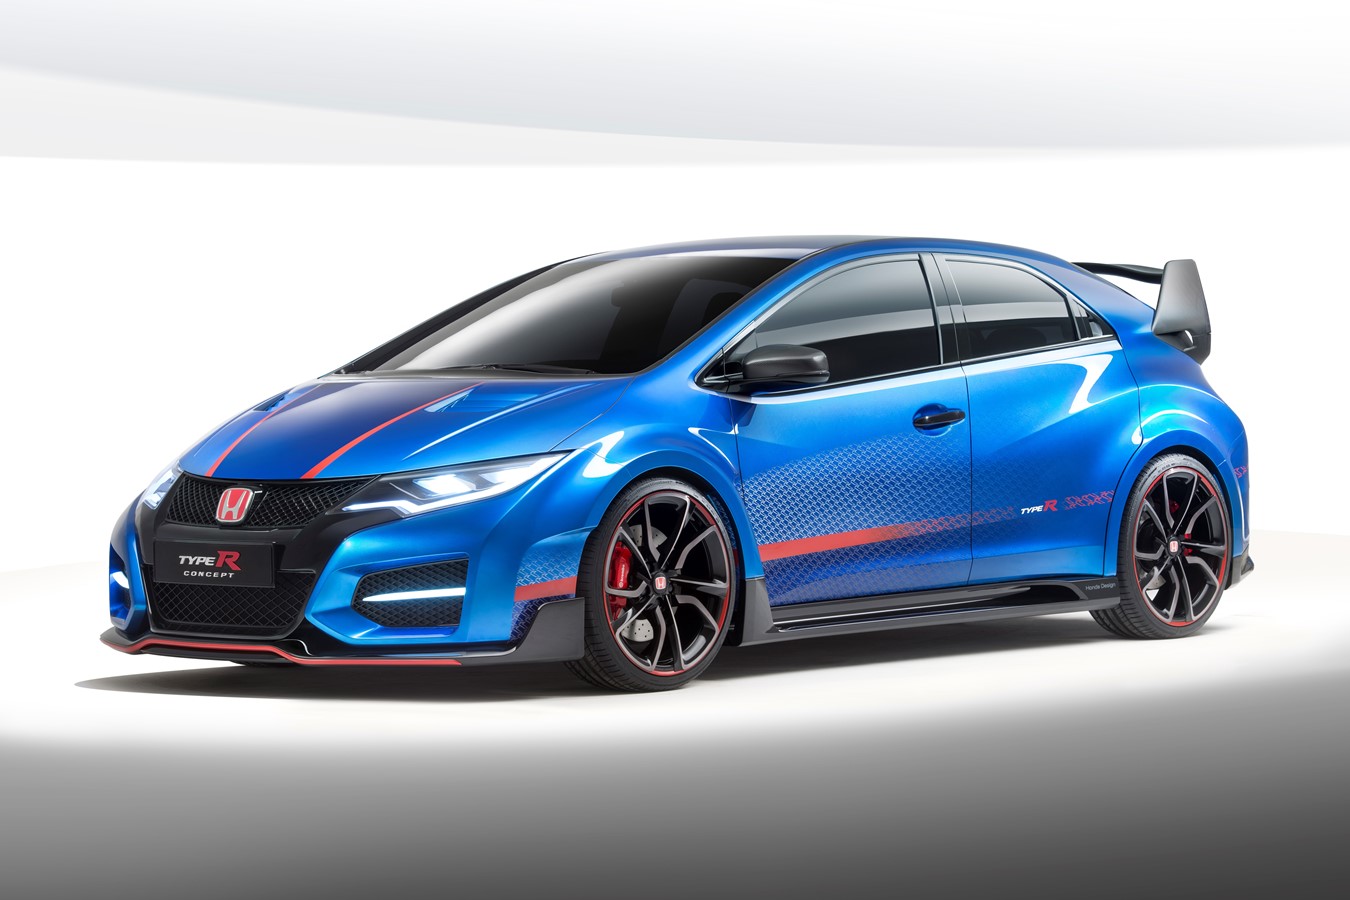 Allnew Honda Civic Type R unrivalled against the brand's iconic